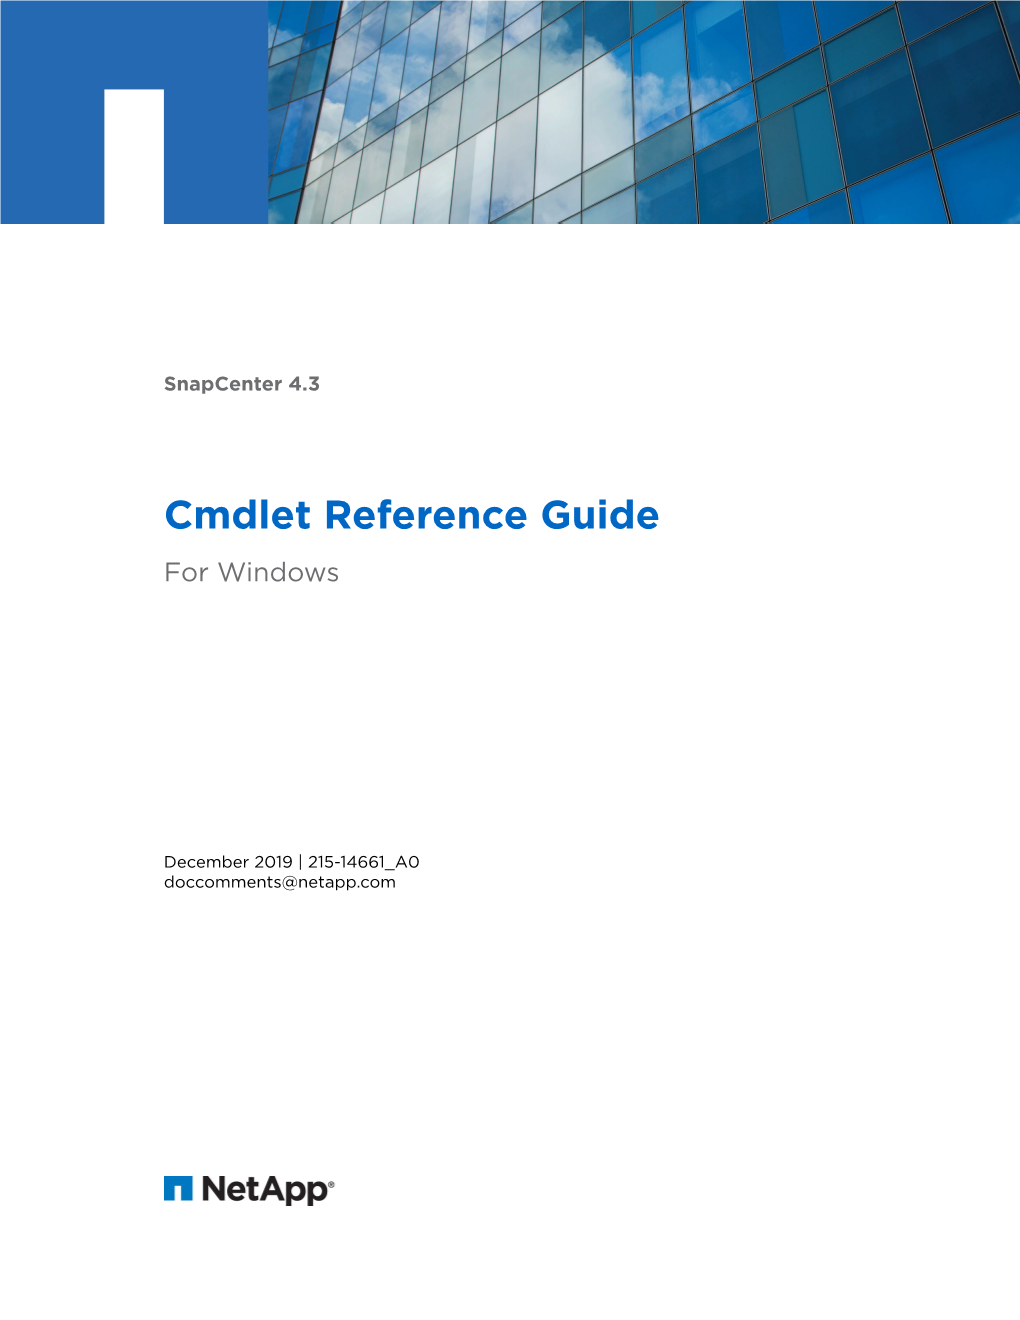 Snapcenter 4.3 Cmdlet Reference Guide for Windows